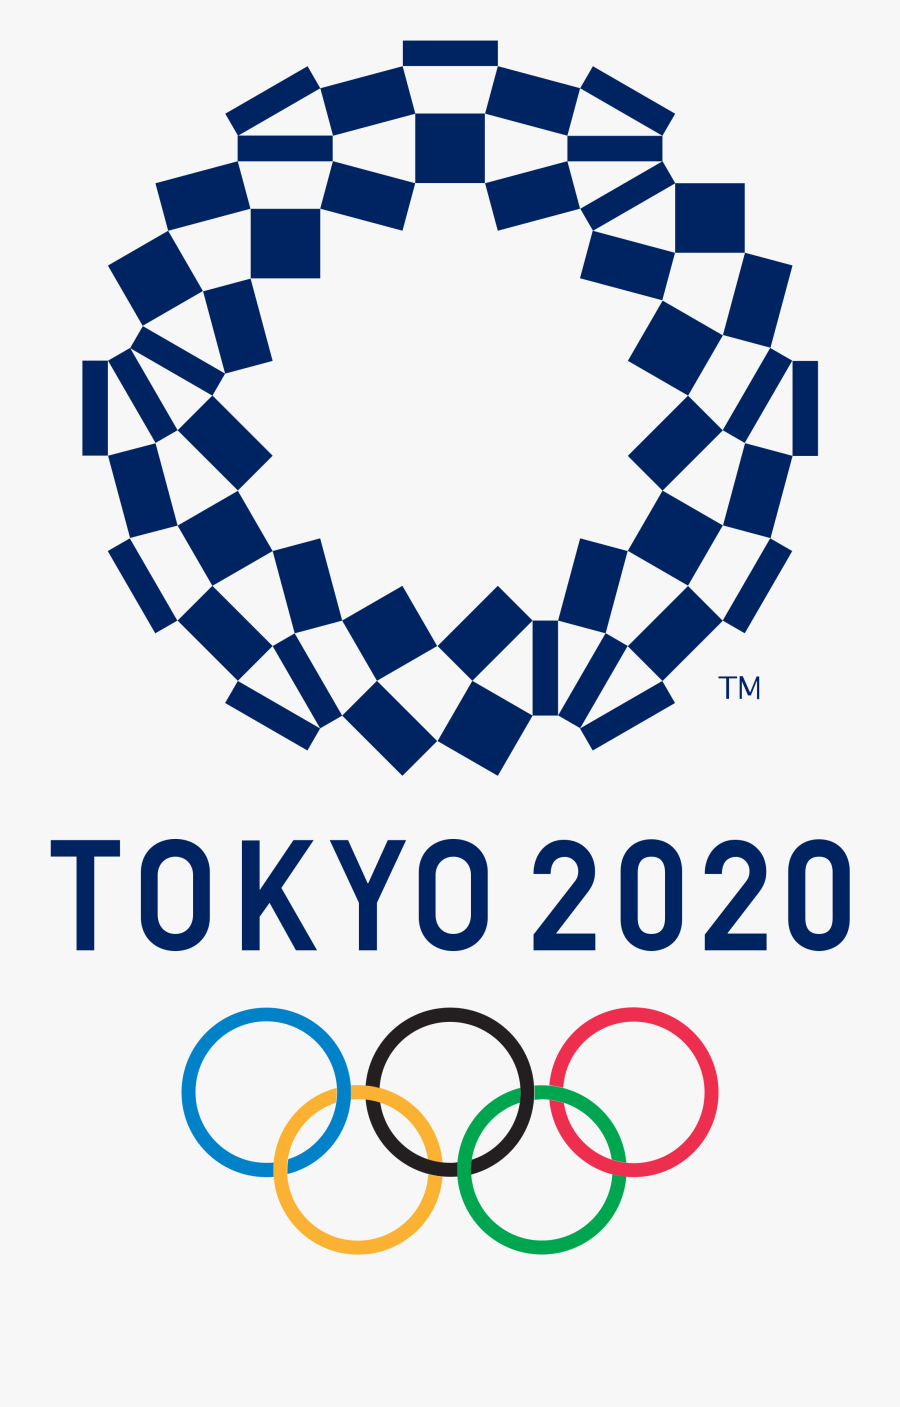 Olympic Vector - Tokyo 2020 Logo Png, Transparent Clipart